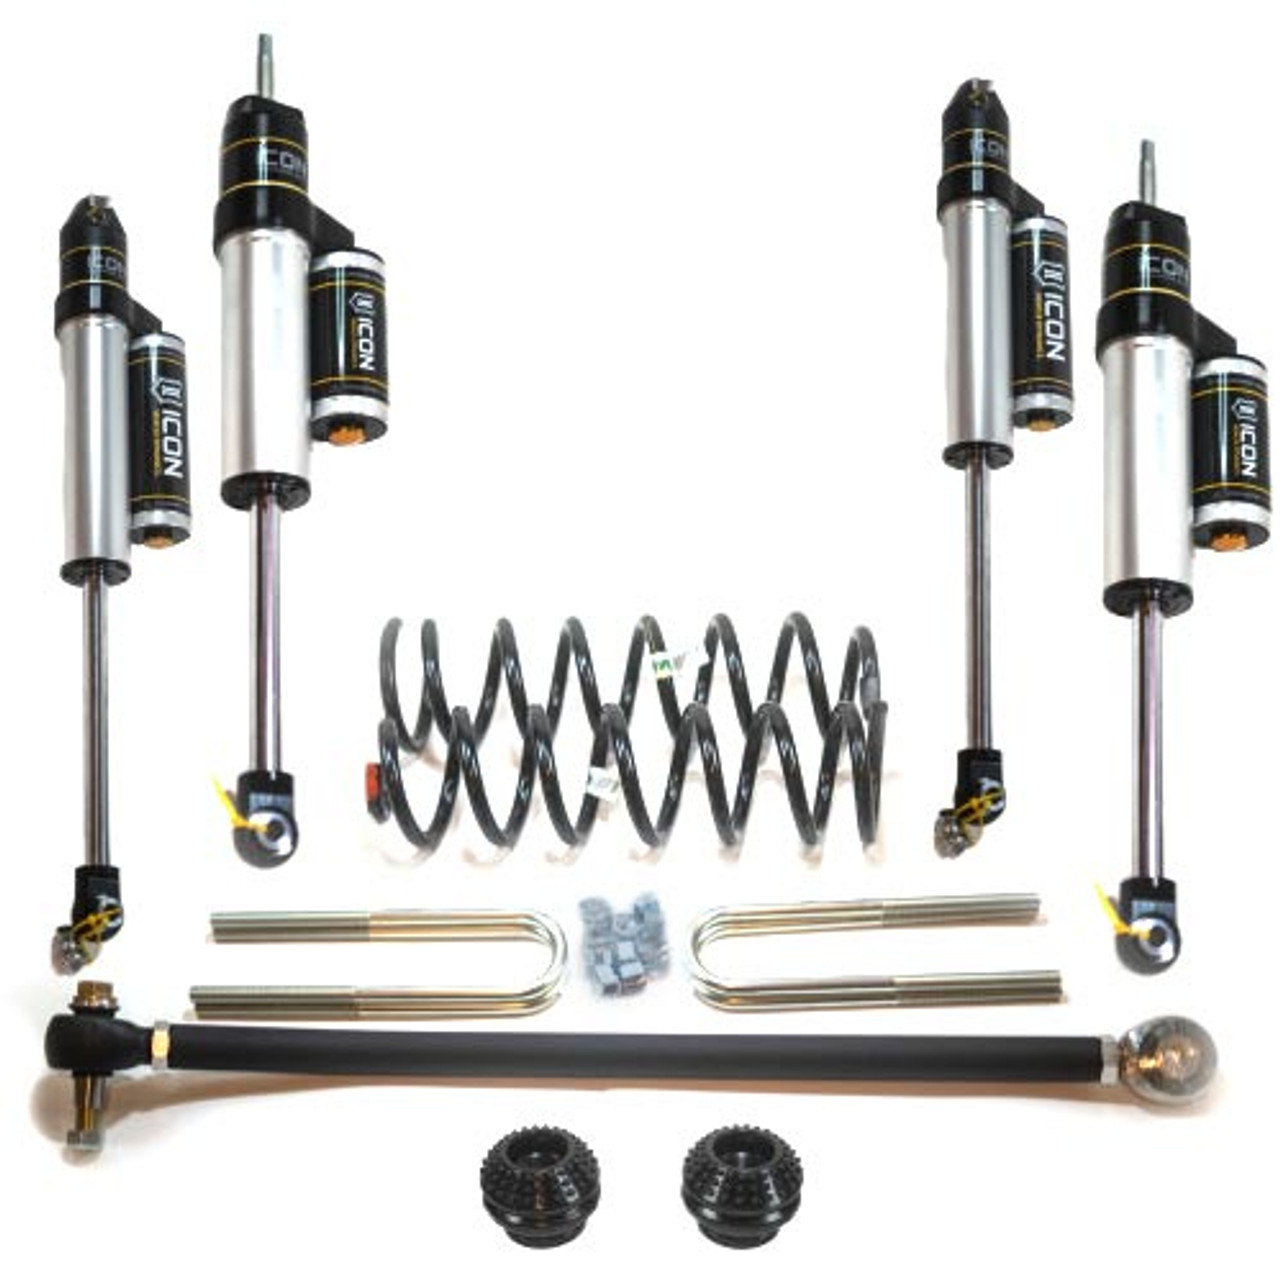  NO LIMIT FABRICATION REVERSE LEVEL KIT WITH 2.5" SHOCKS 2005-2010 FORD F-250/350 4WD (12-BOLT/3.5" AXLE) (NLFNLRLK05103525)Kit View